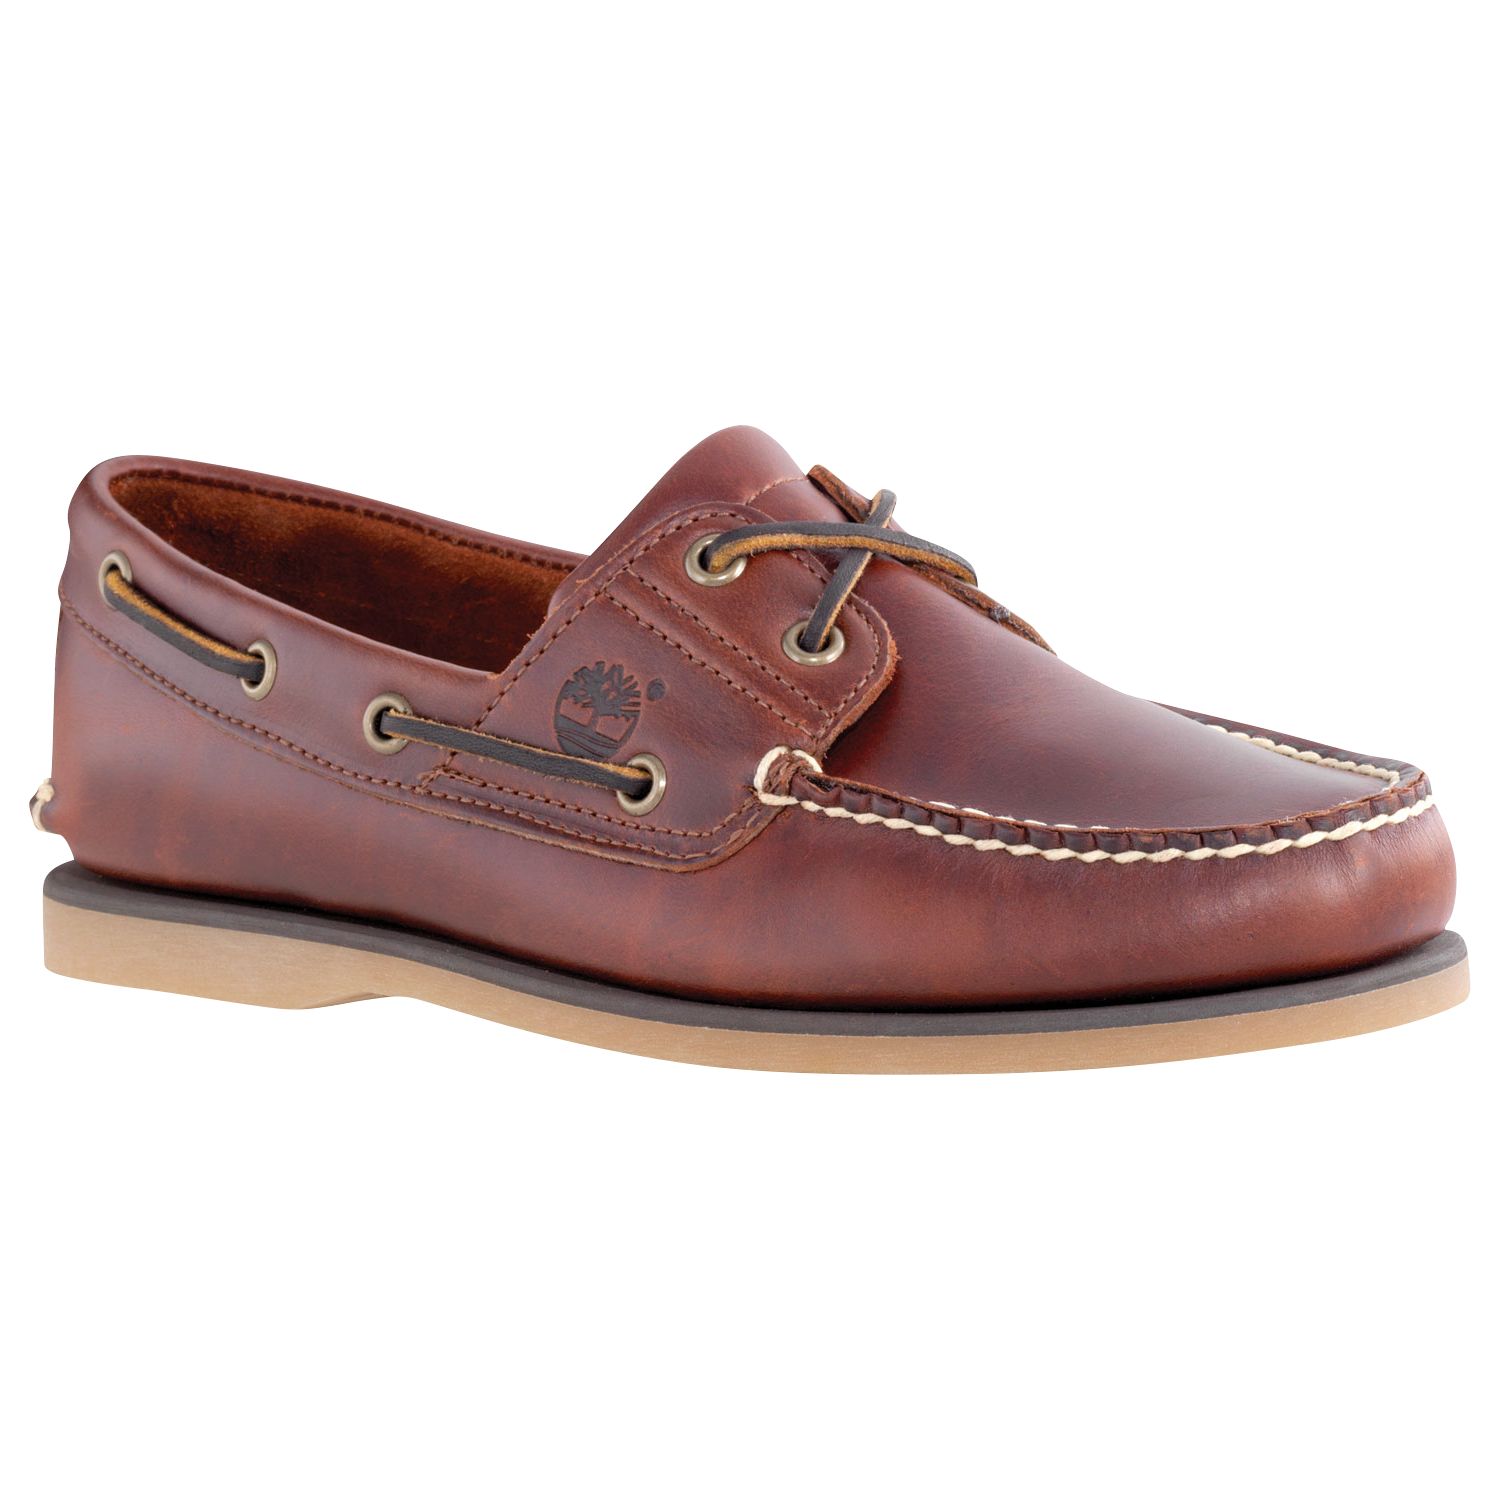 Timberland Leather Boat Shoes, Brown at 